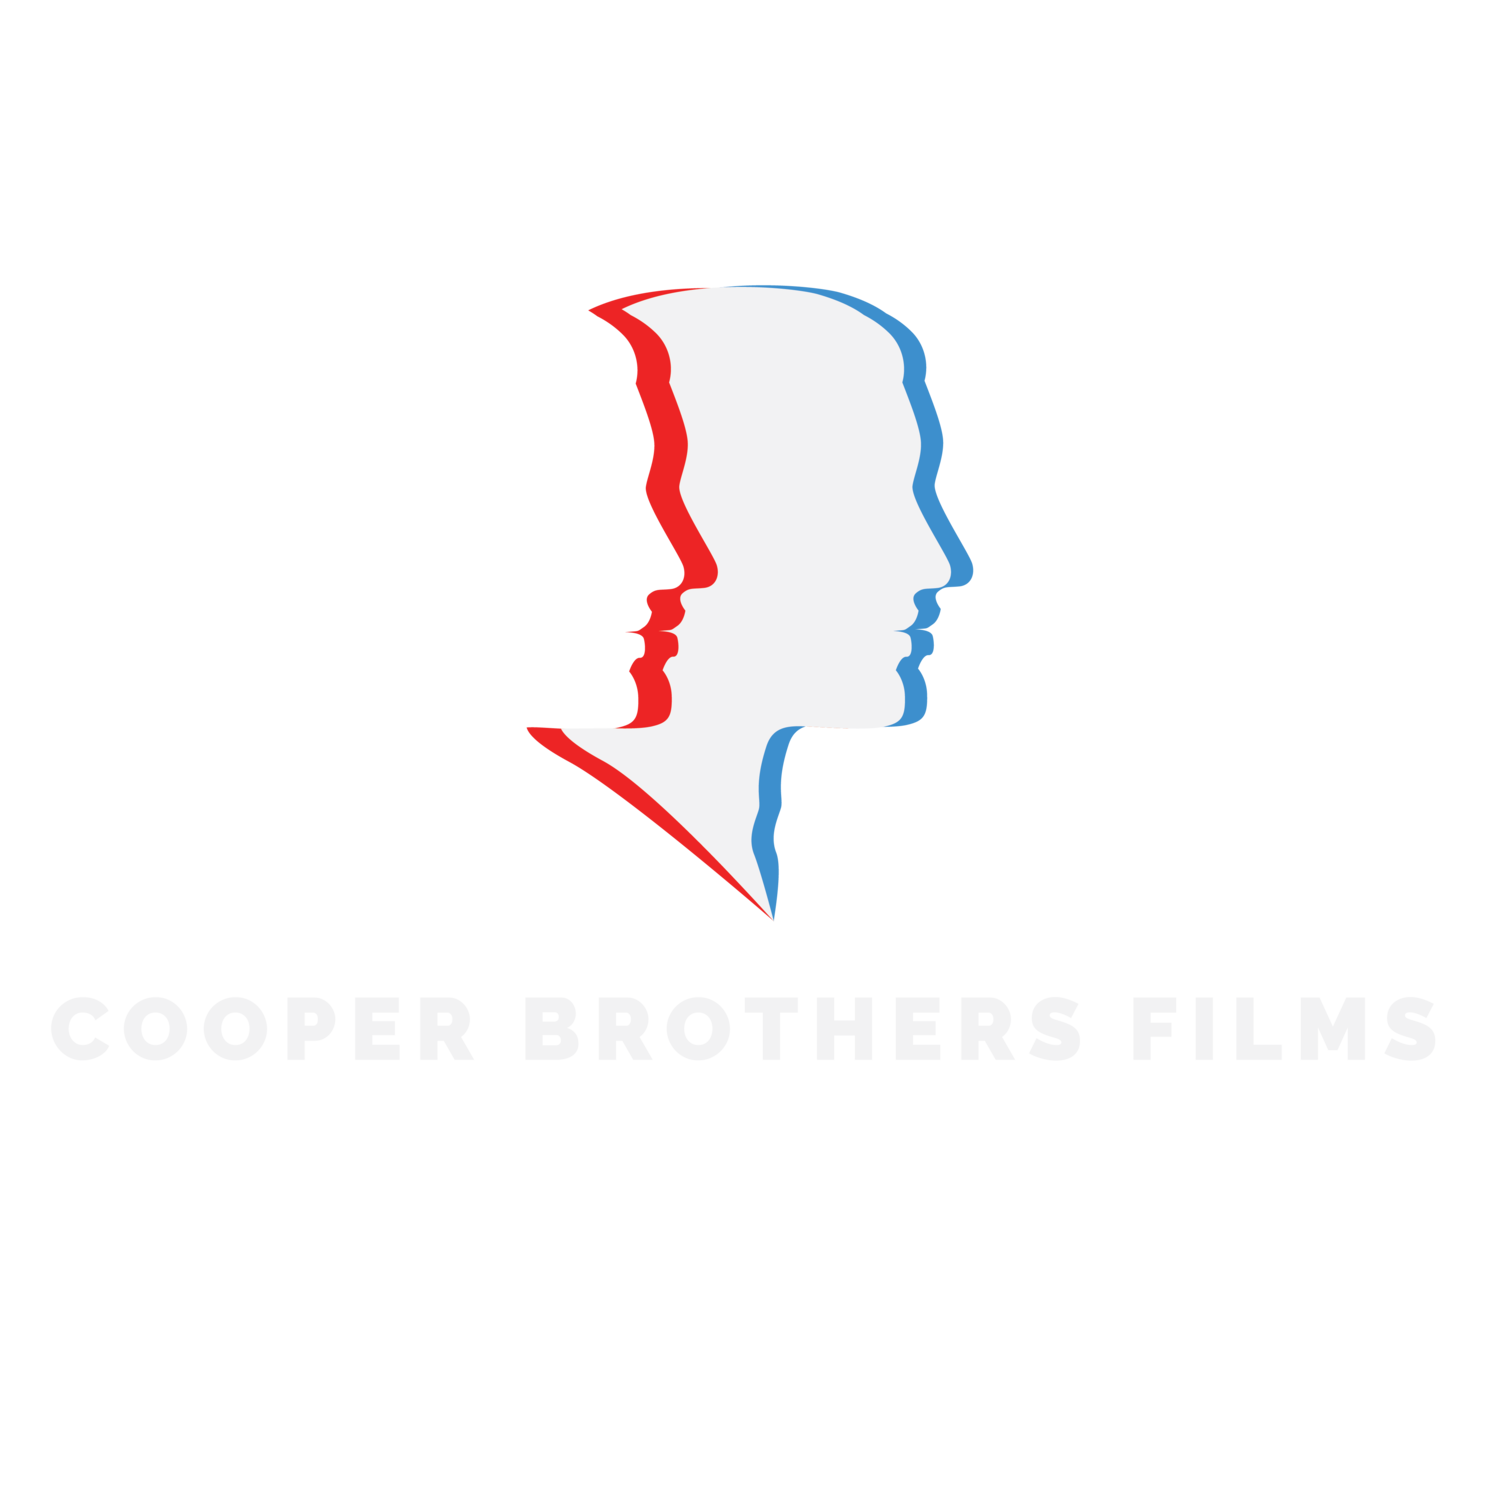 Coopers Brothers Films